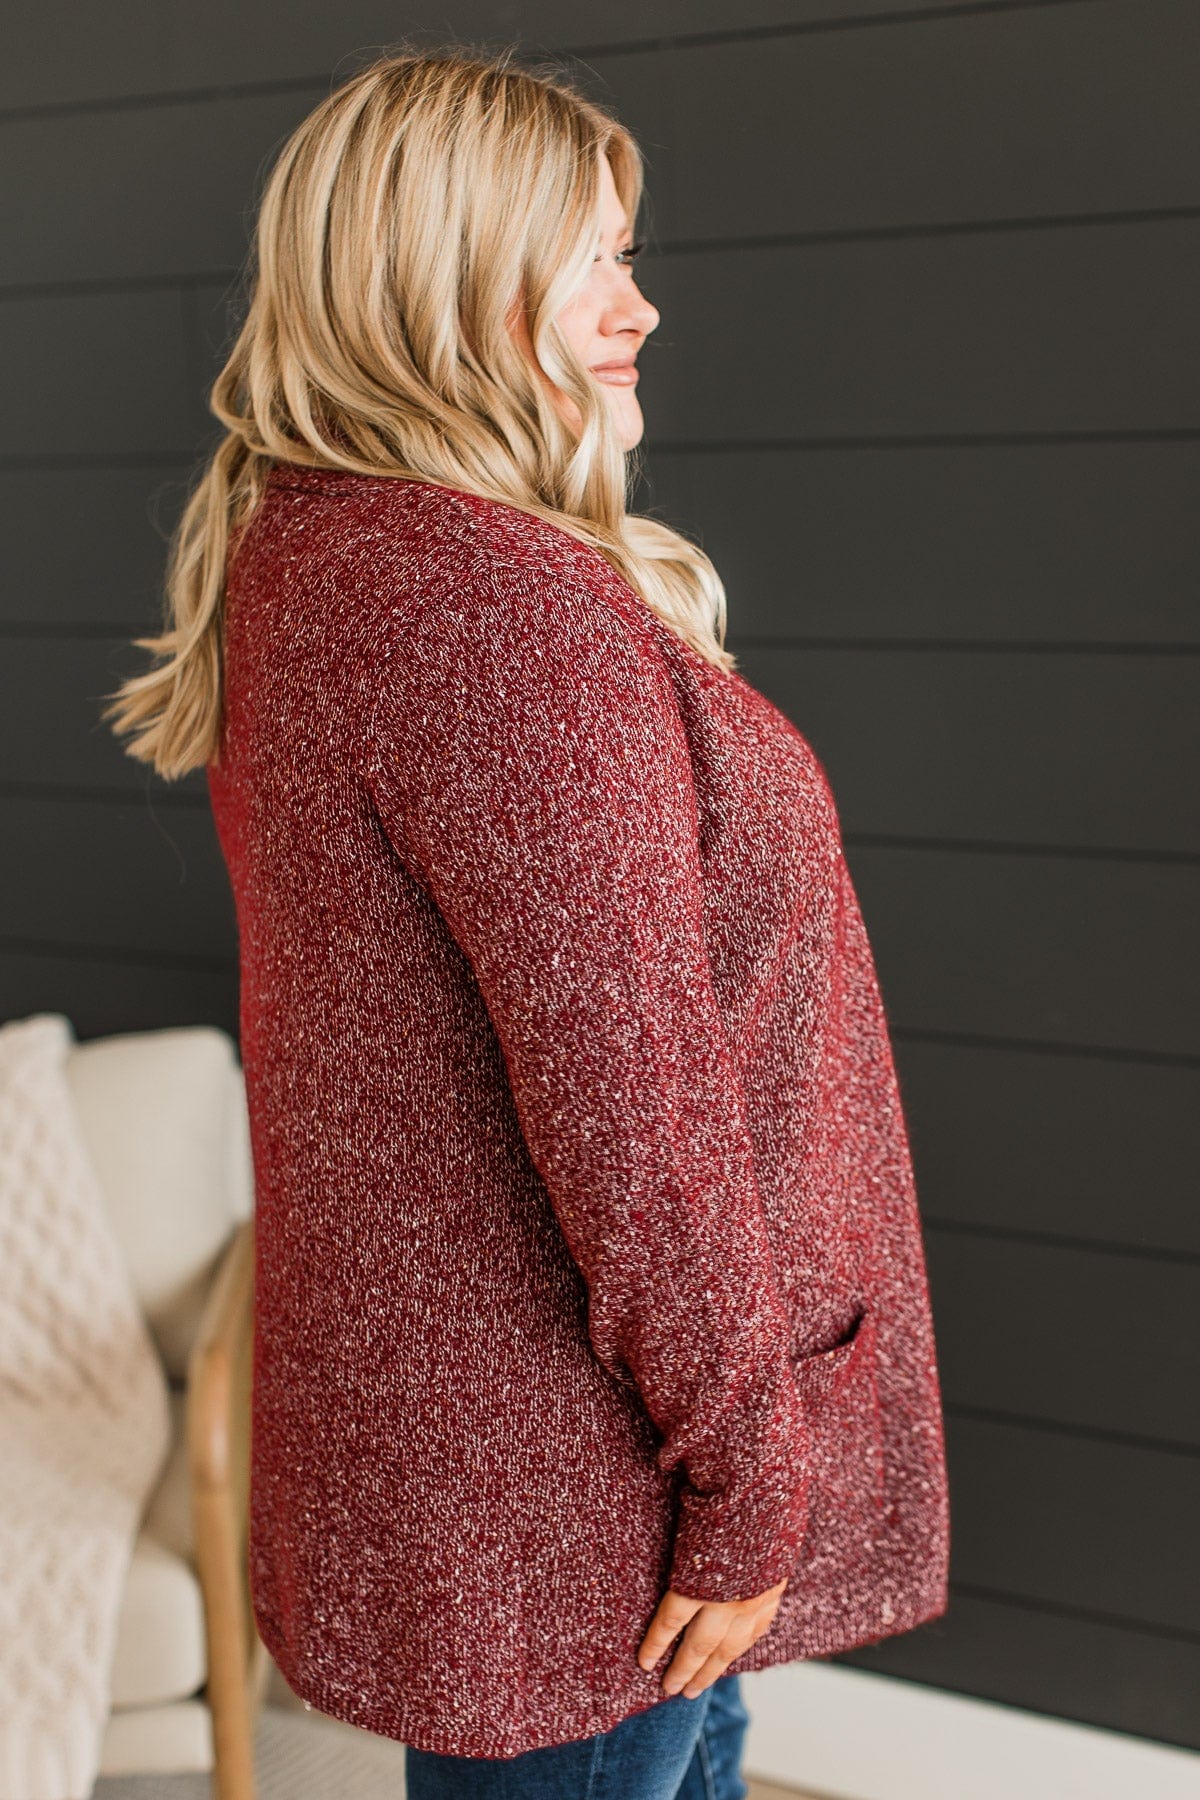 Props To You Sprinkle Knit Cardigan- Burgundy